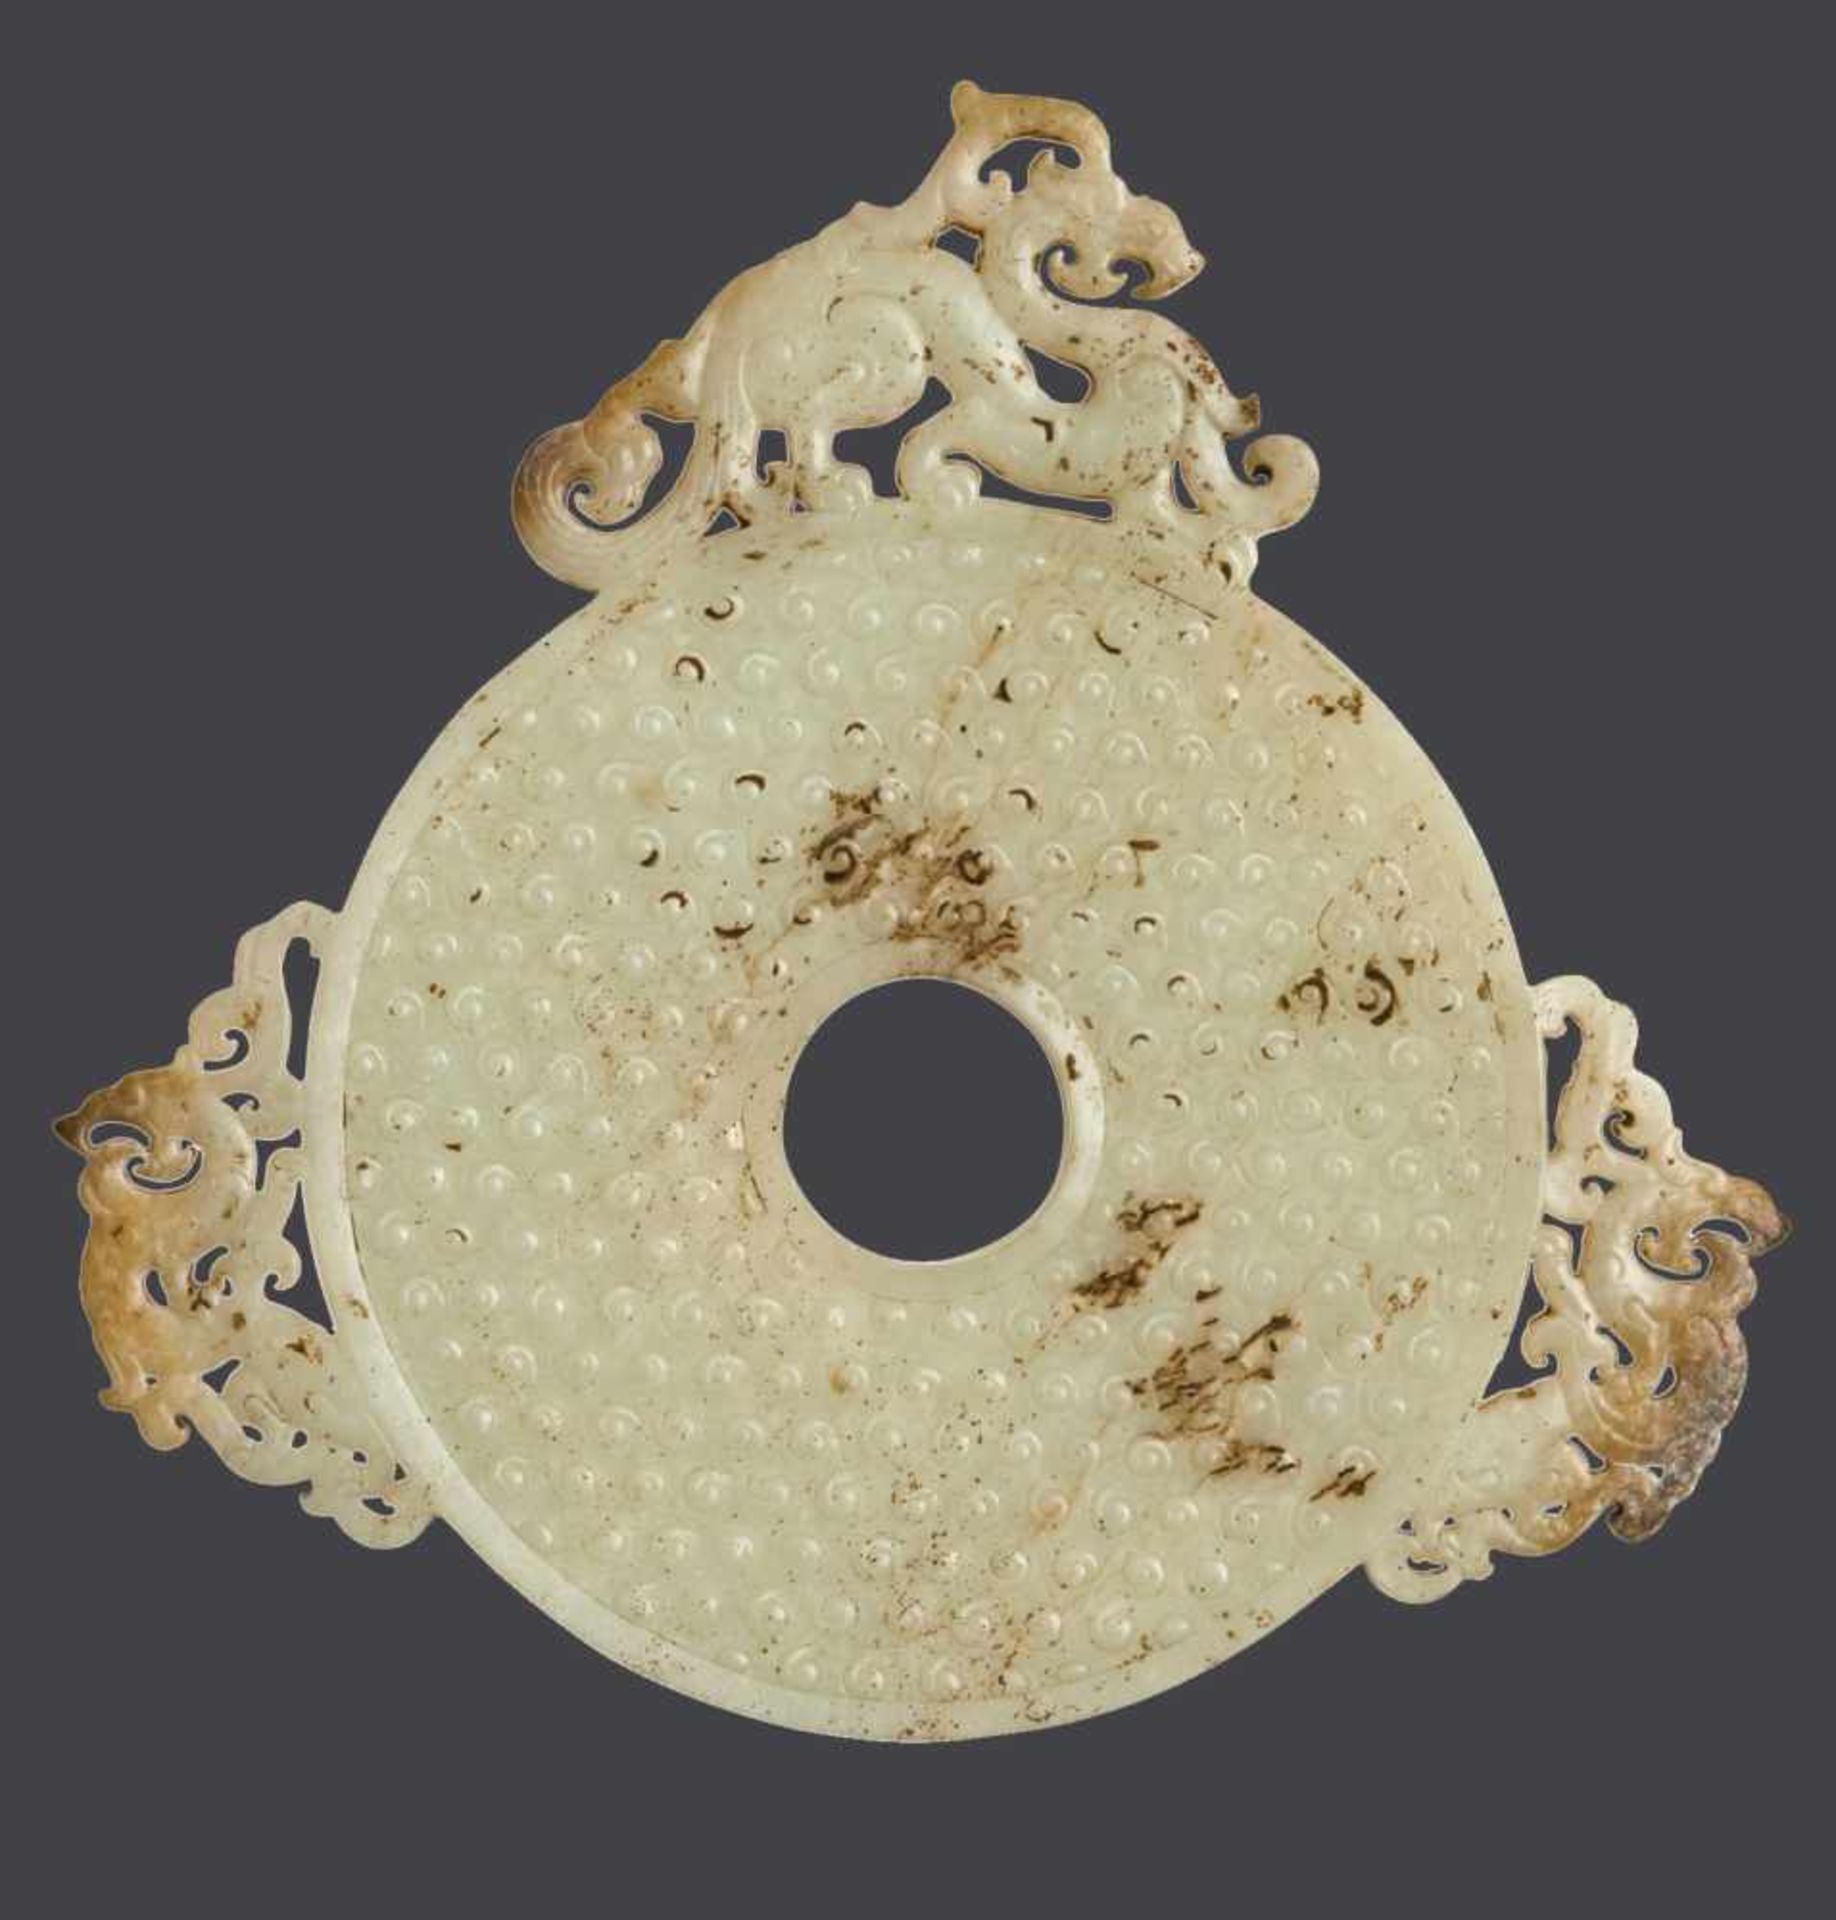 BI DISC WITH DRAGONS AND RAISED CURLS This jade is published in Filippo Salviati 4000 YEARS OF